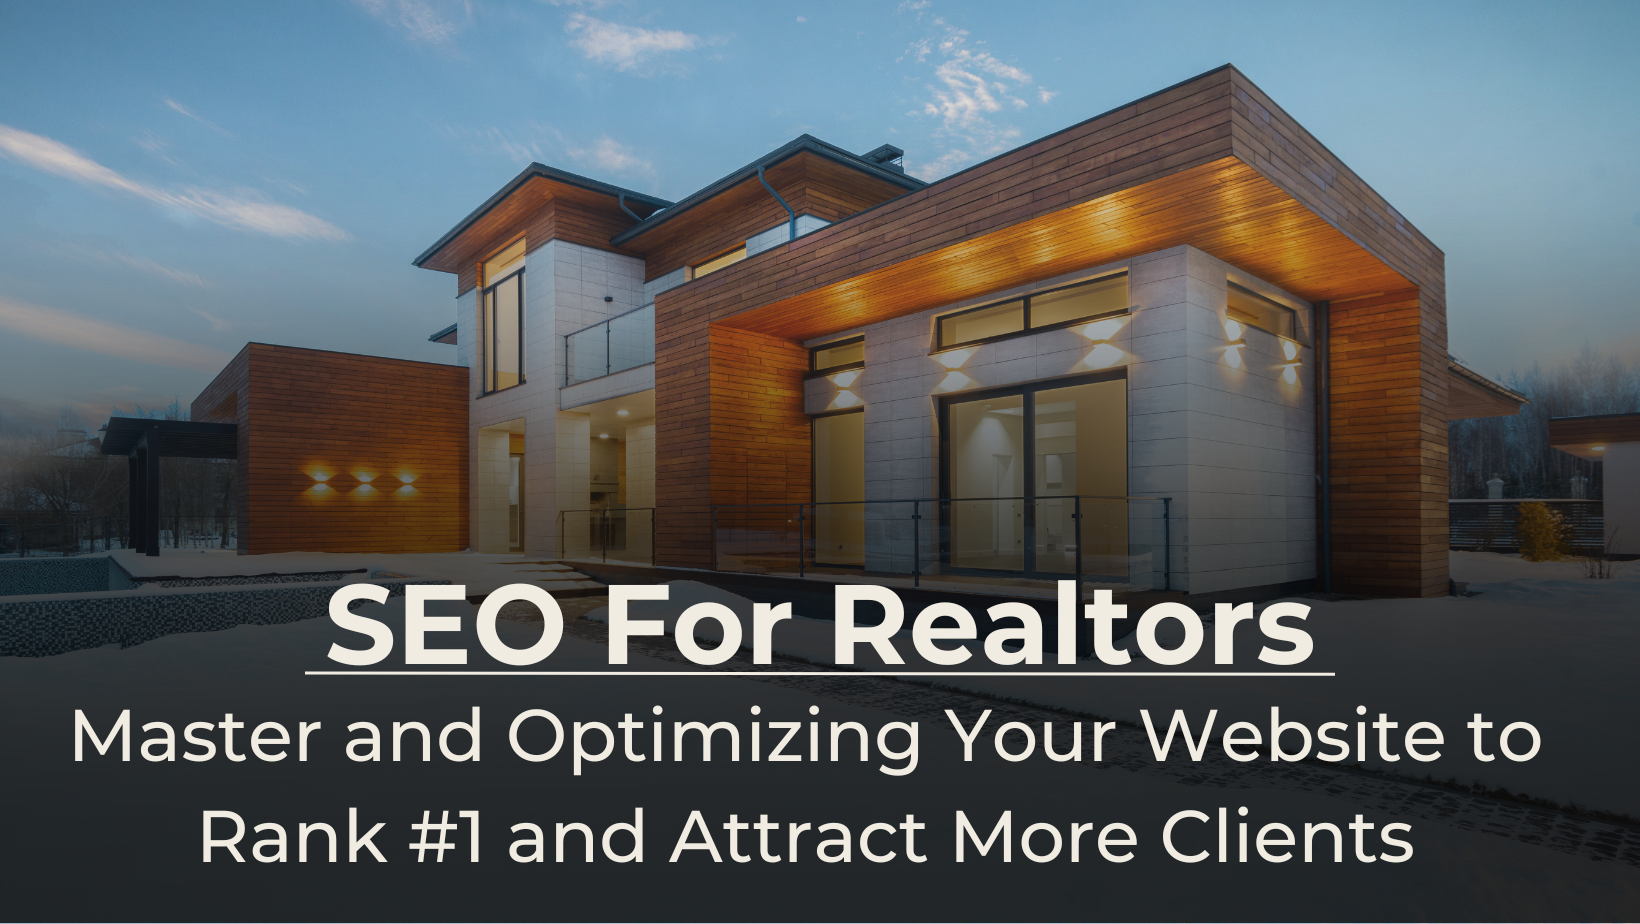 SEO for Realtors: Master and Optimizing Your Website to Rank #1 and Attract More Clients